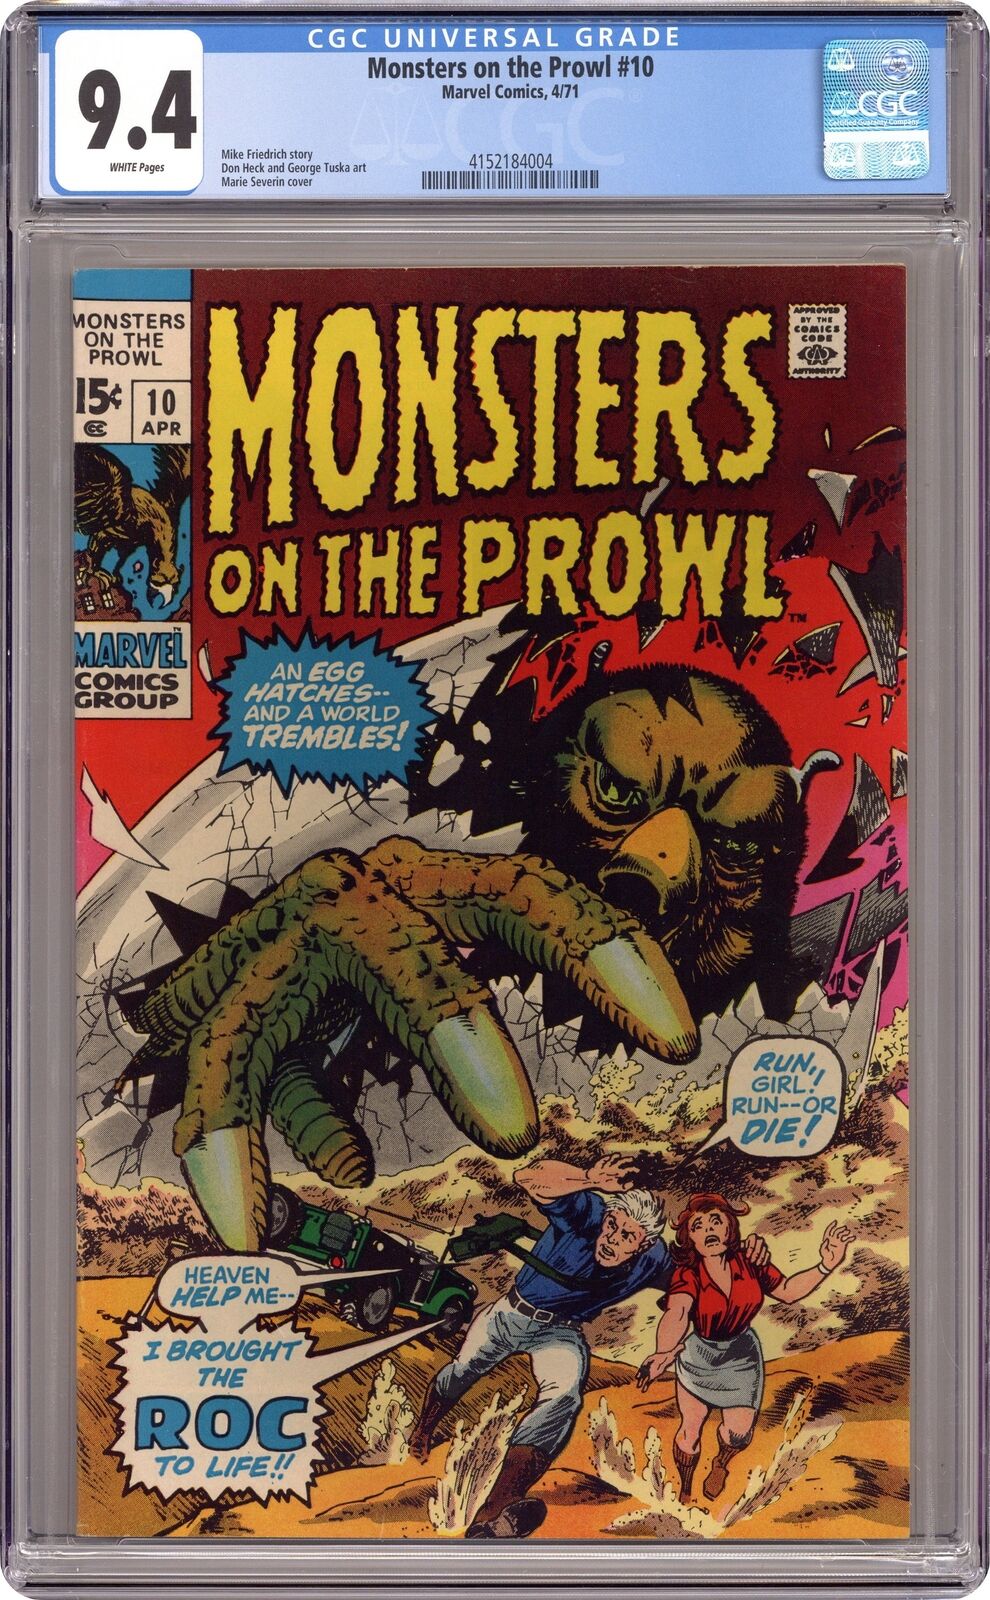 Monsters on the Prowl #10 CGC 9.4 1971 4152184004